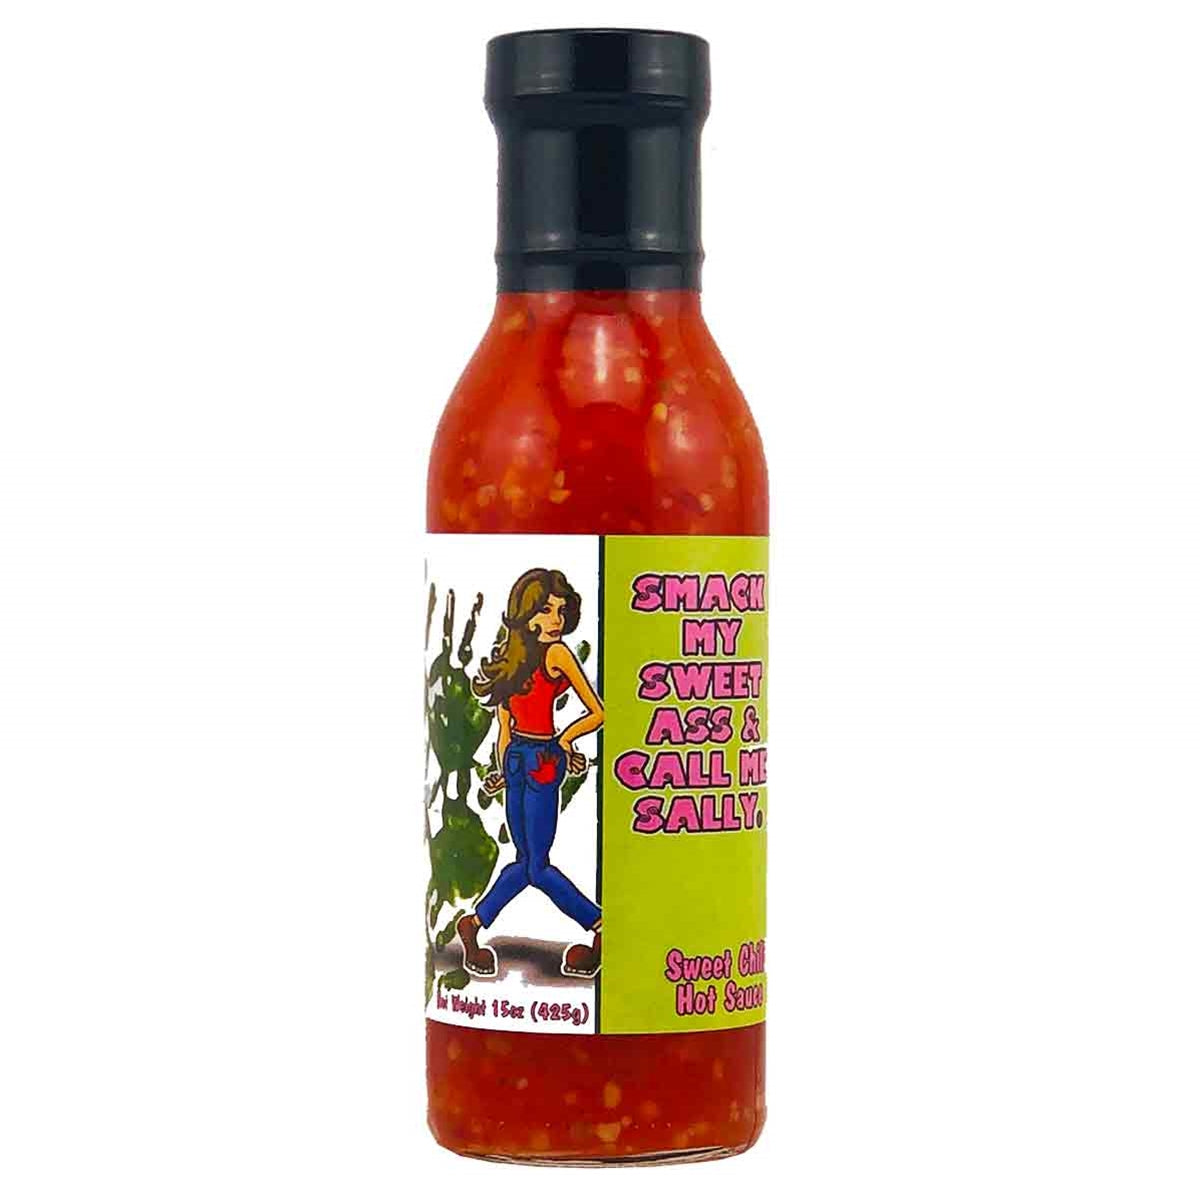 Hot Sauce Smack My Ass & Call Me Sally Sweet Chile 15 oz BIG plastic bottle